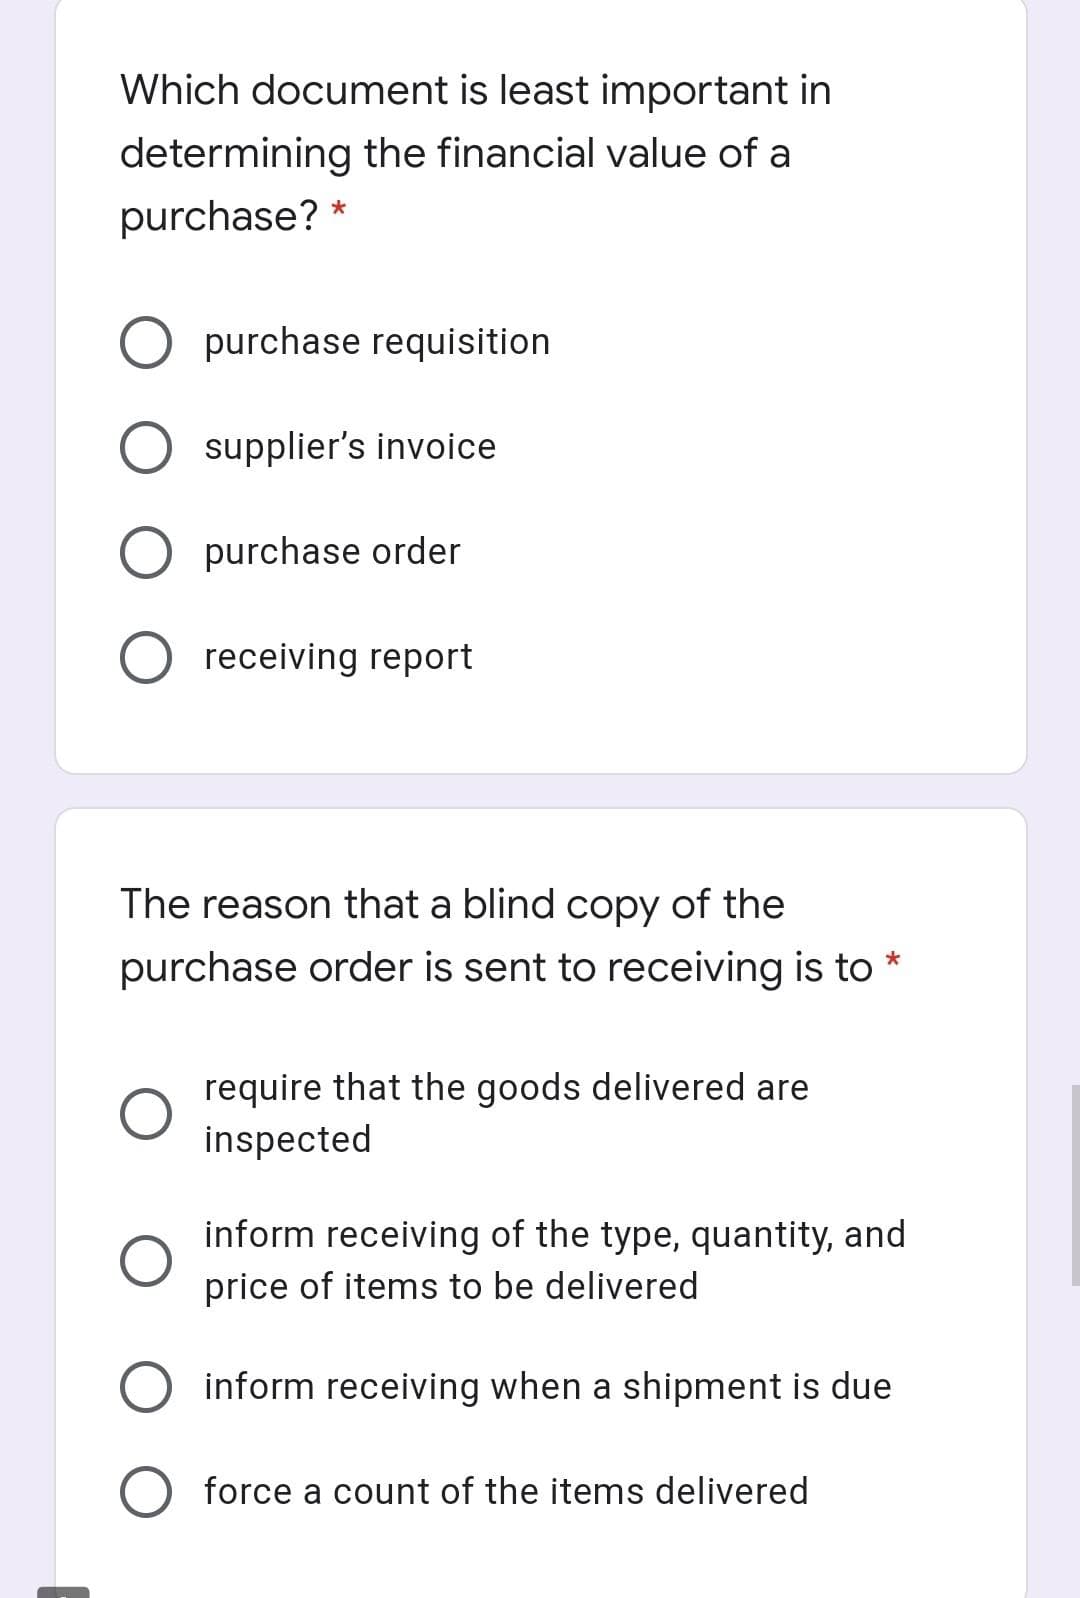 Which document is least important in
determining the financial value of a
purchase?
purchase requisition
supplier's invoice
O purchase order
receiving report
The reason that a blind copy of the
purchase order is sent to receiving is to
require that the goods delivered are
inspected
inform receiving of the type, quantity, and
price of items to be delivered
inform receiving when a shipment is due
force a count of the items delivered
